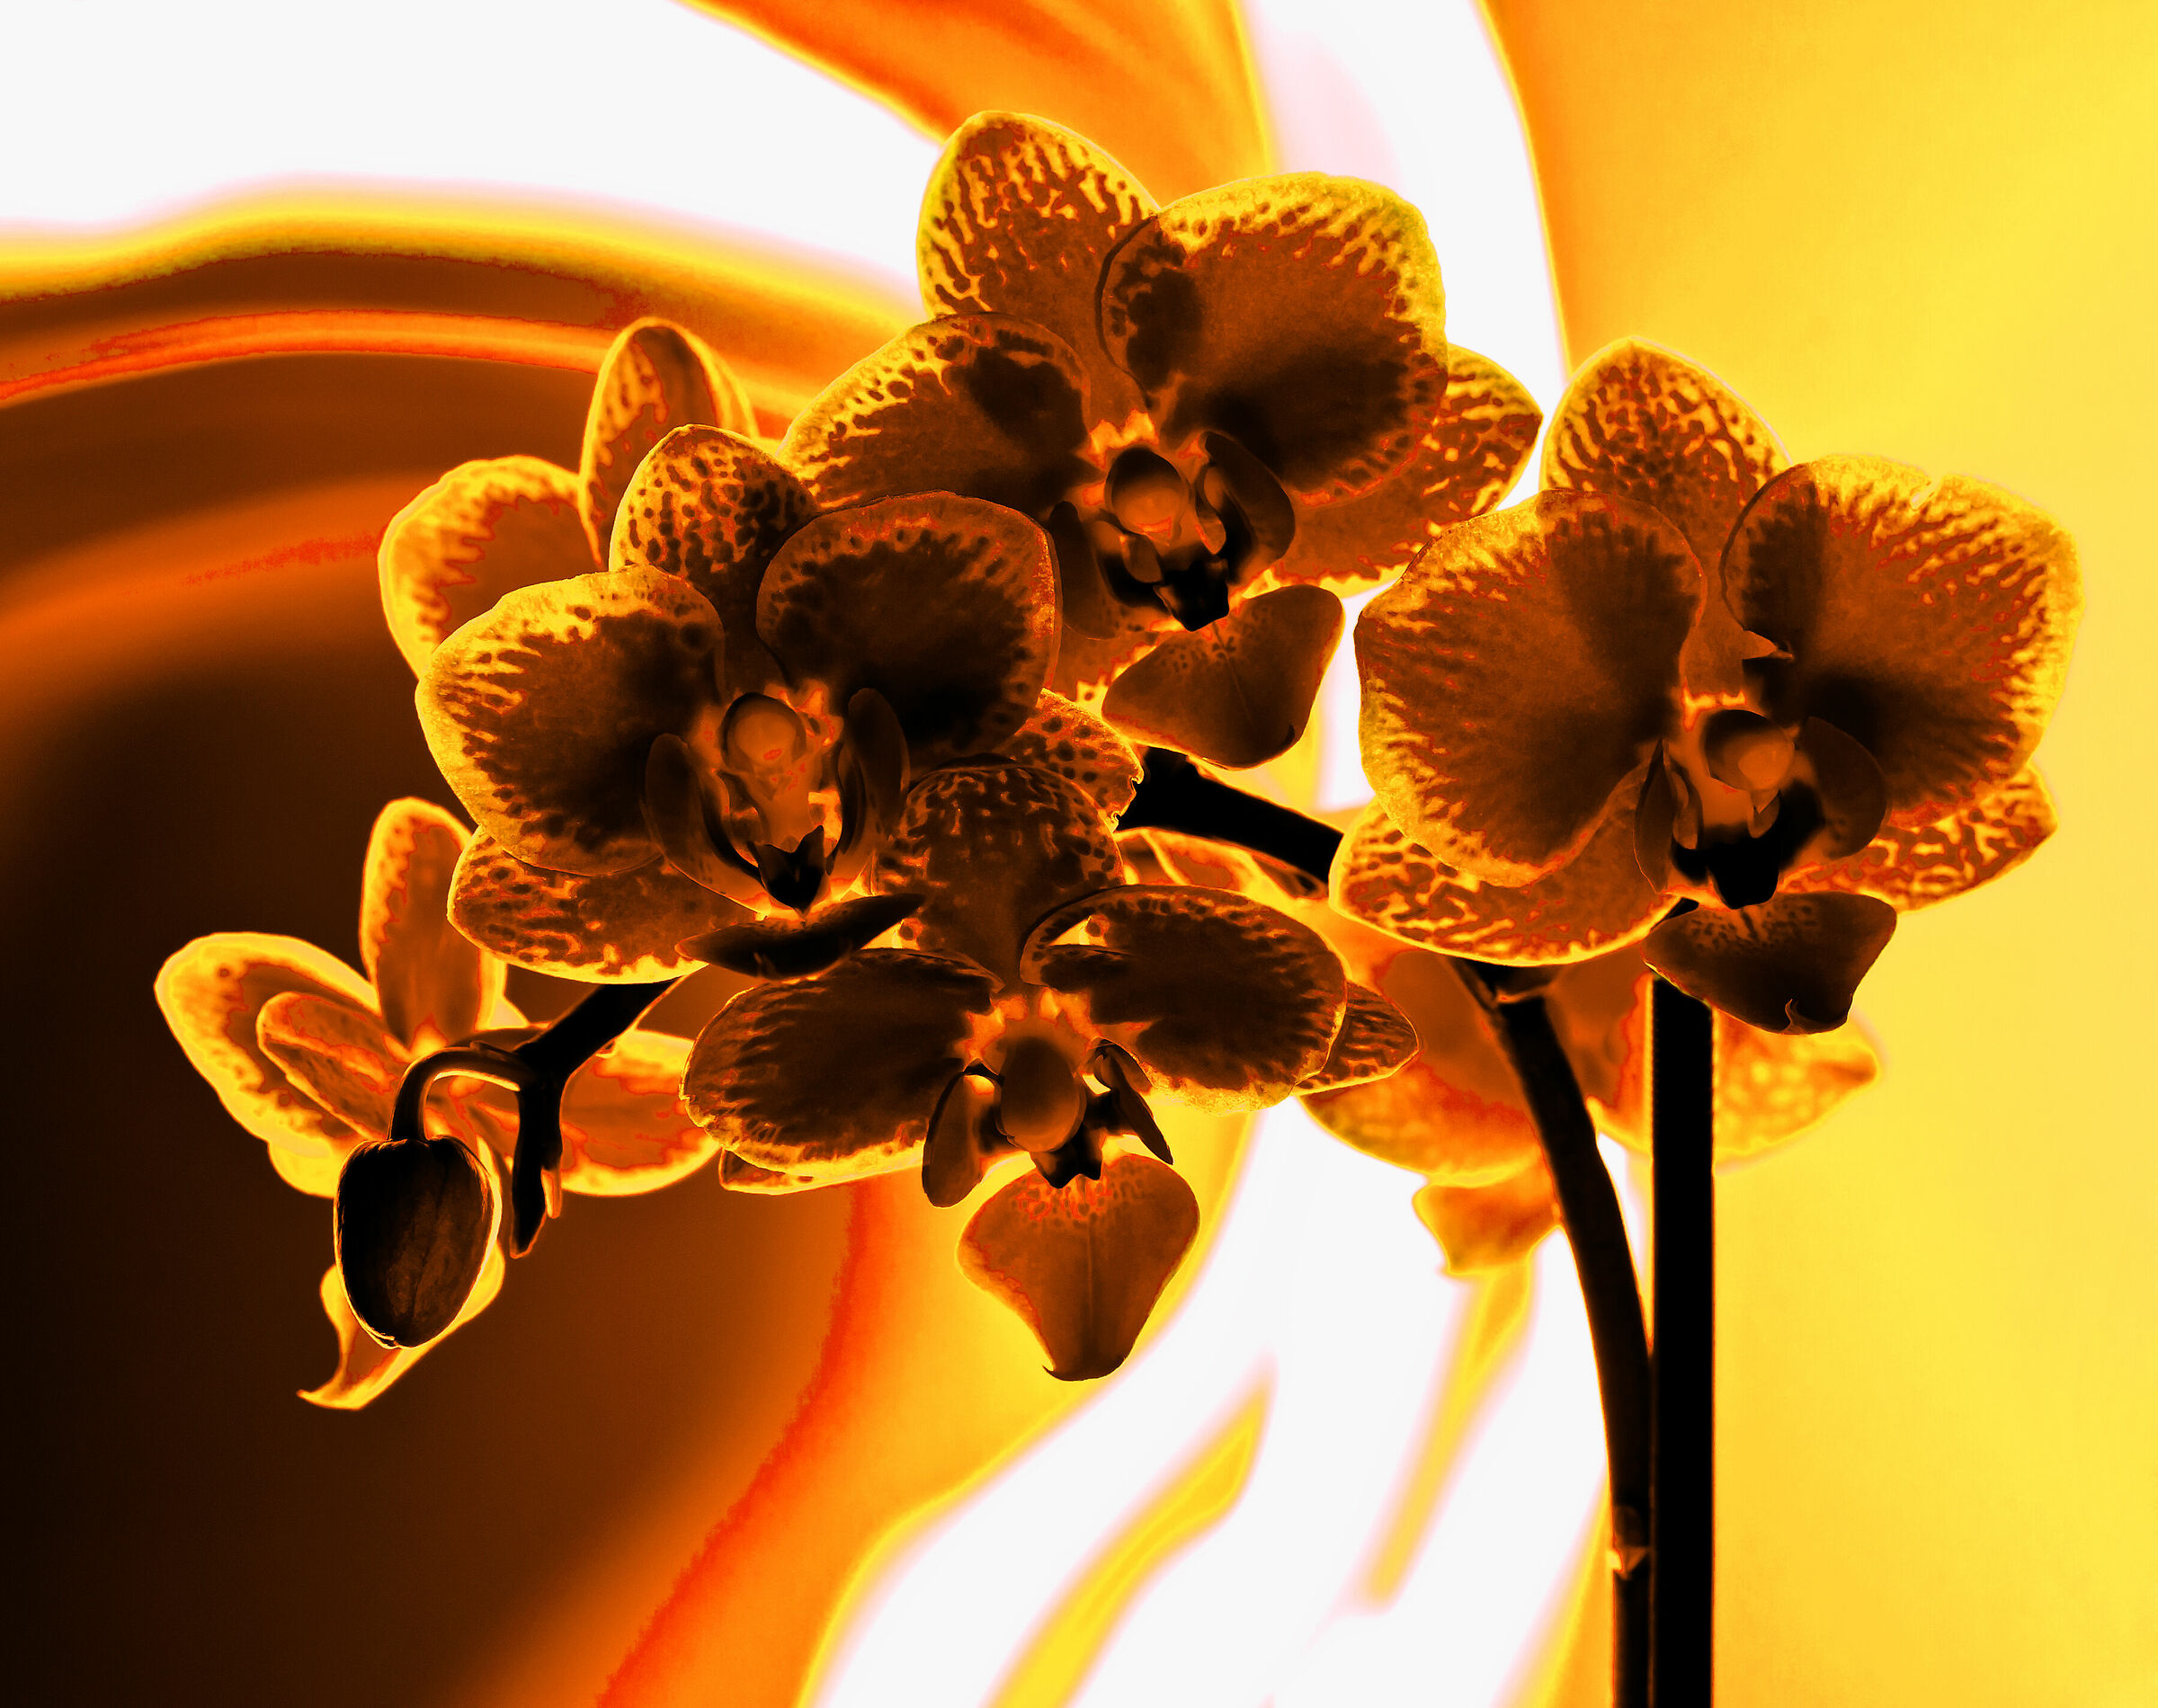 Orchid on fire...